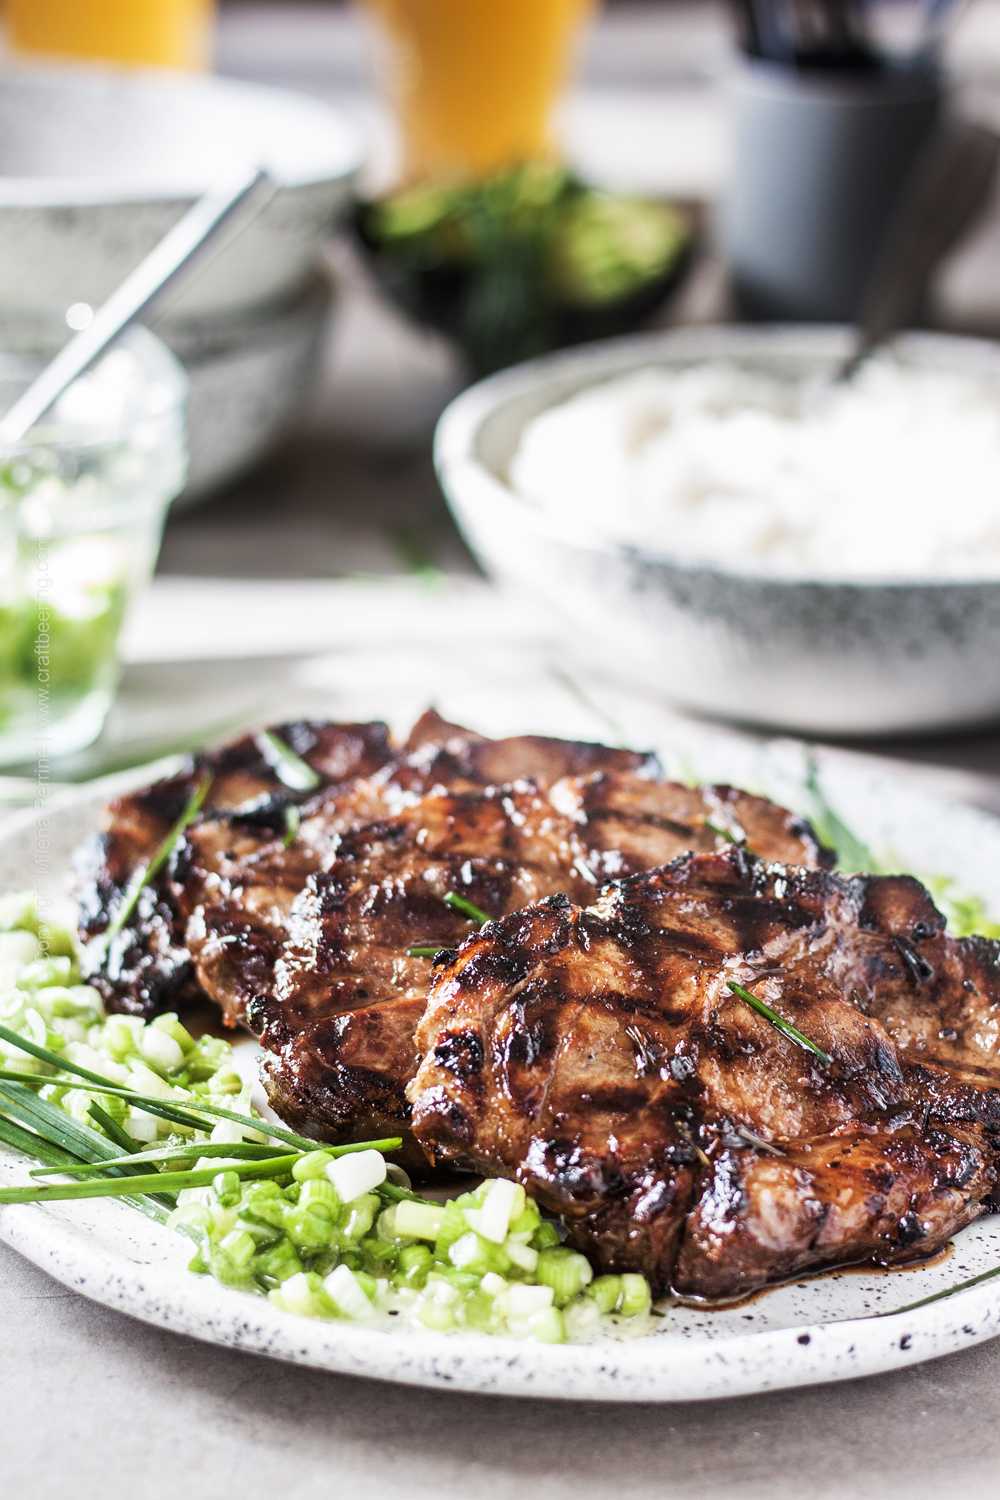 Grilled pork collar chops in Vietnamese marinade, served with scallion ginger sauce and rice.